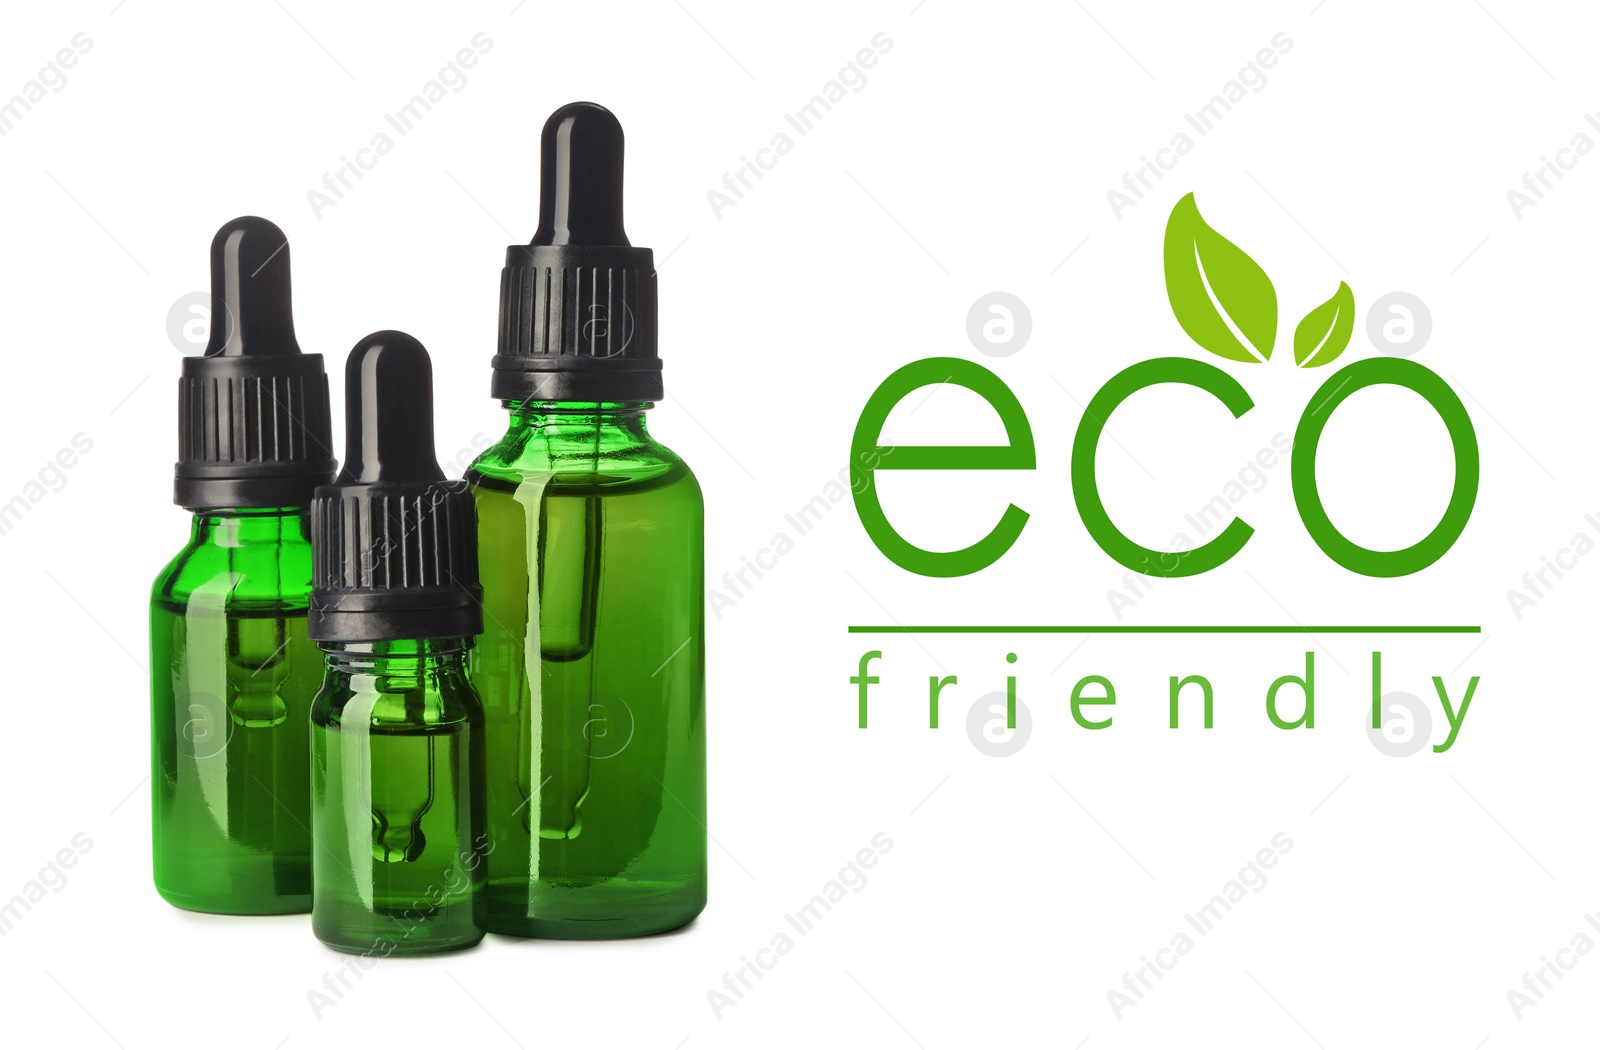 Image of Organic eco friendly cosmetic products on white background